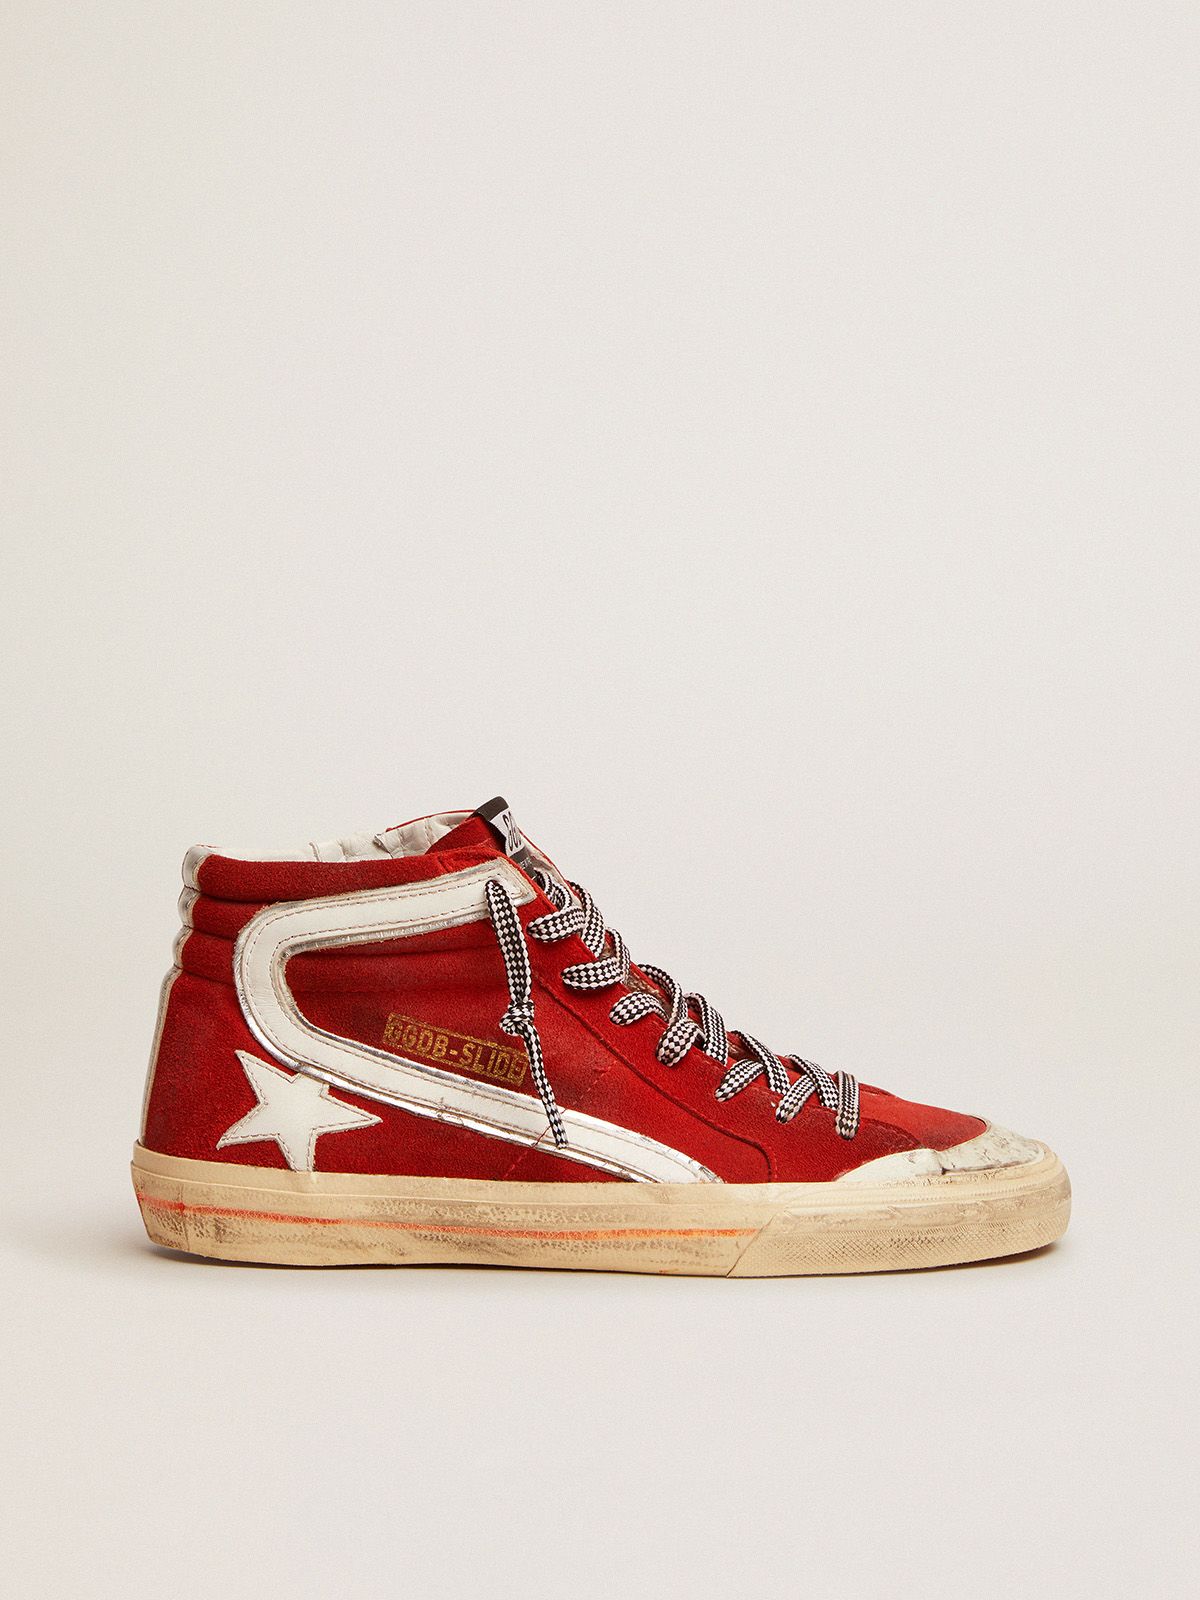 Penstar Slide sneakers in red suede with white details | 